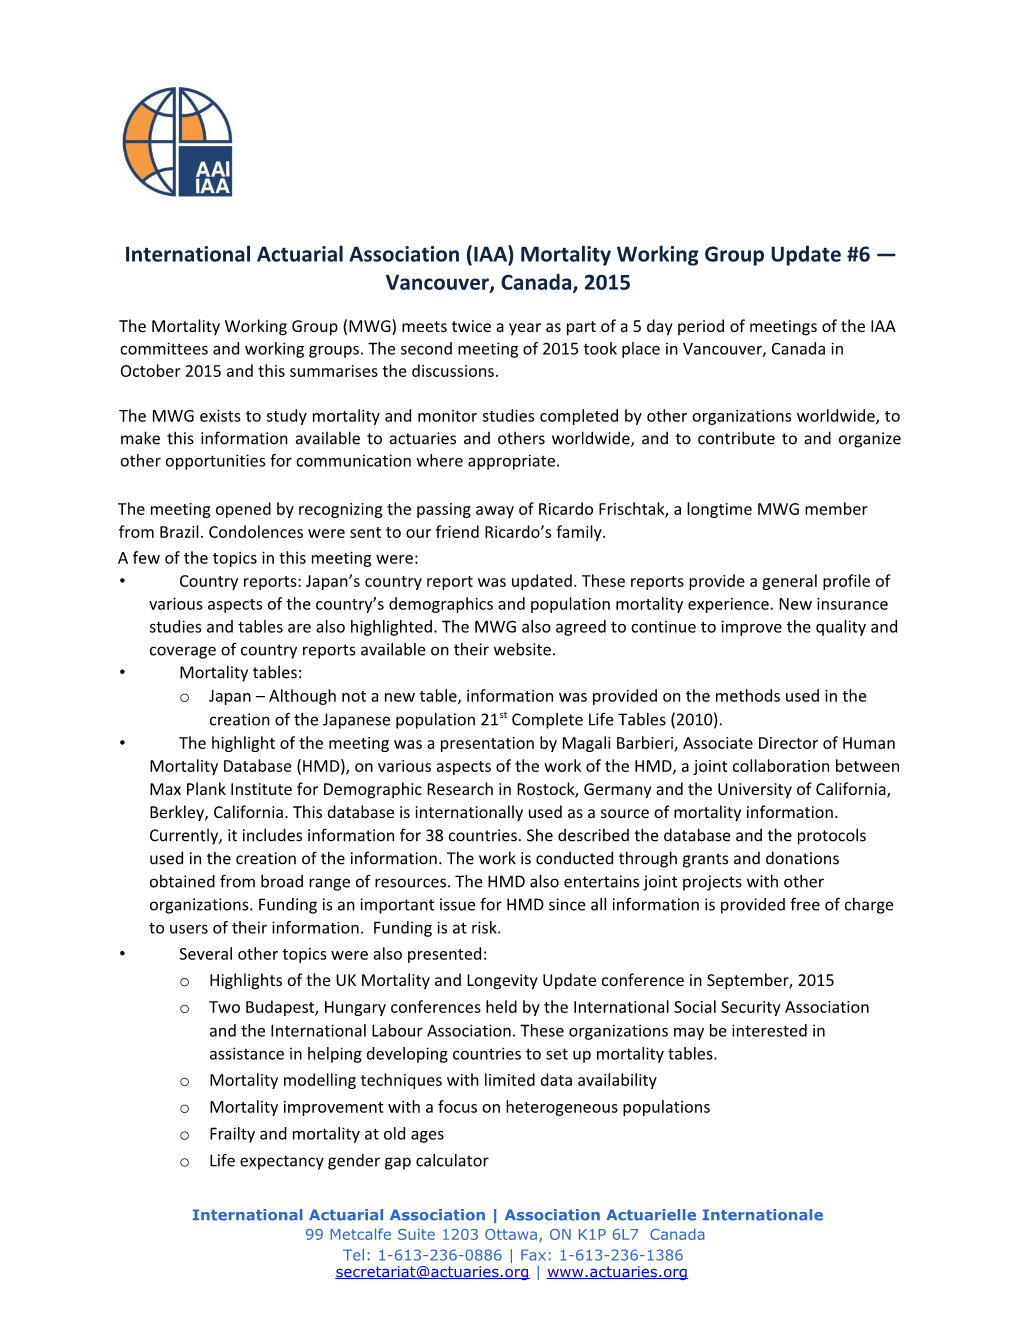 International Actuarial Association (IAA) Mortality Working Group Update #6 Vancouver